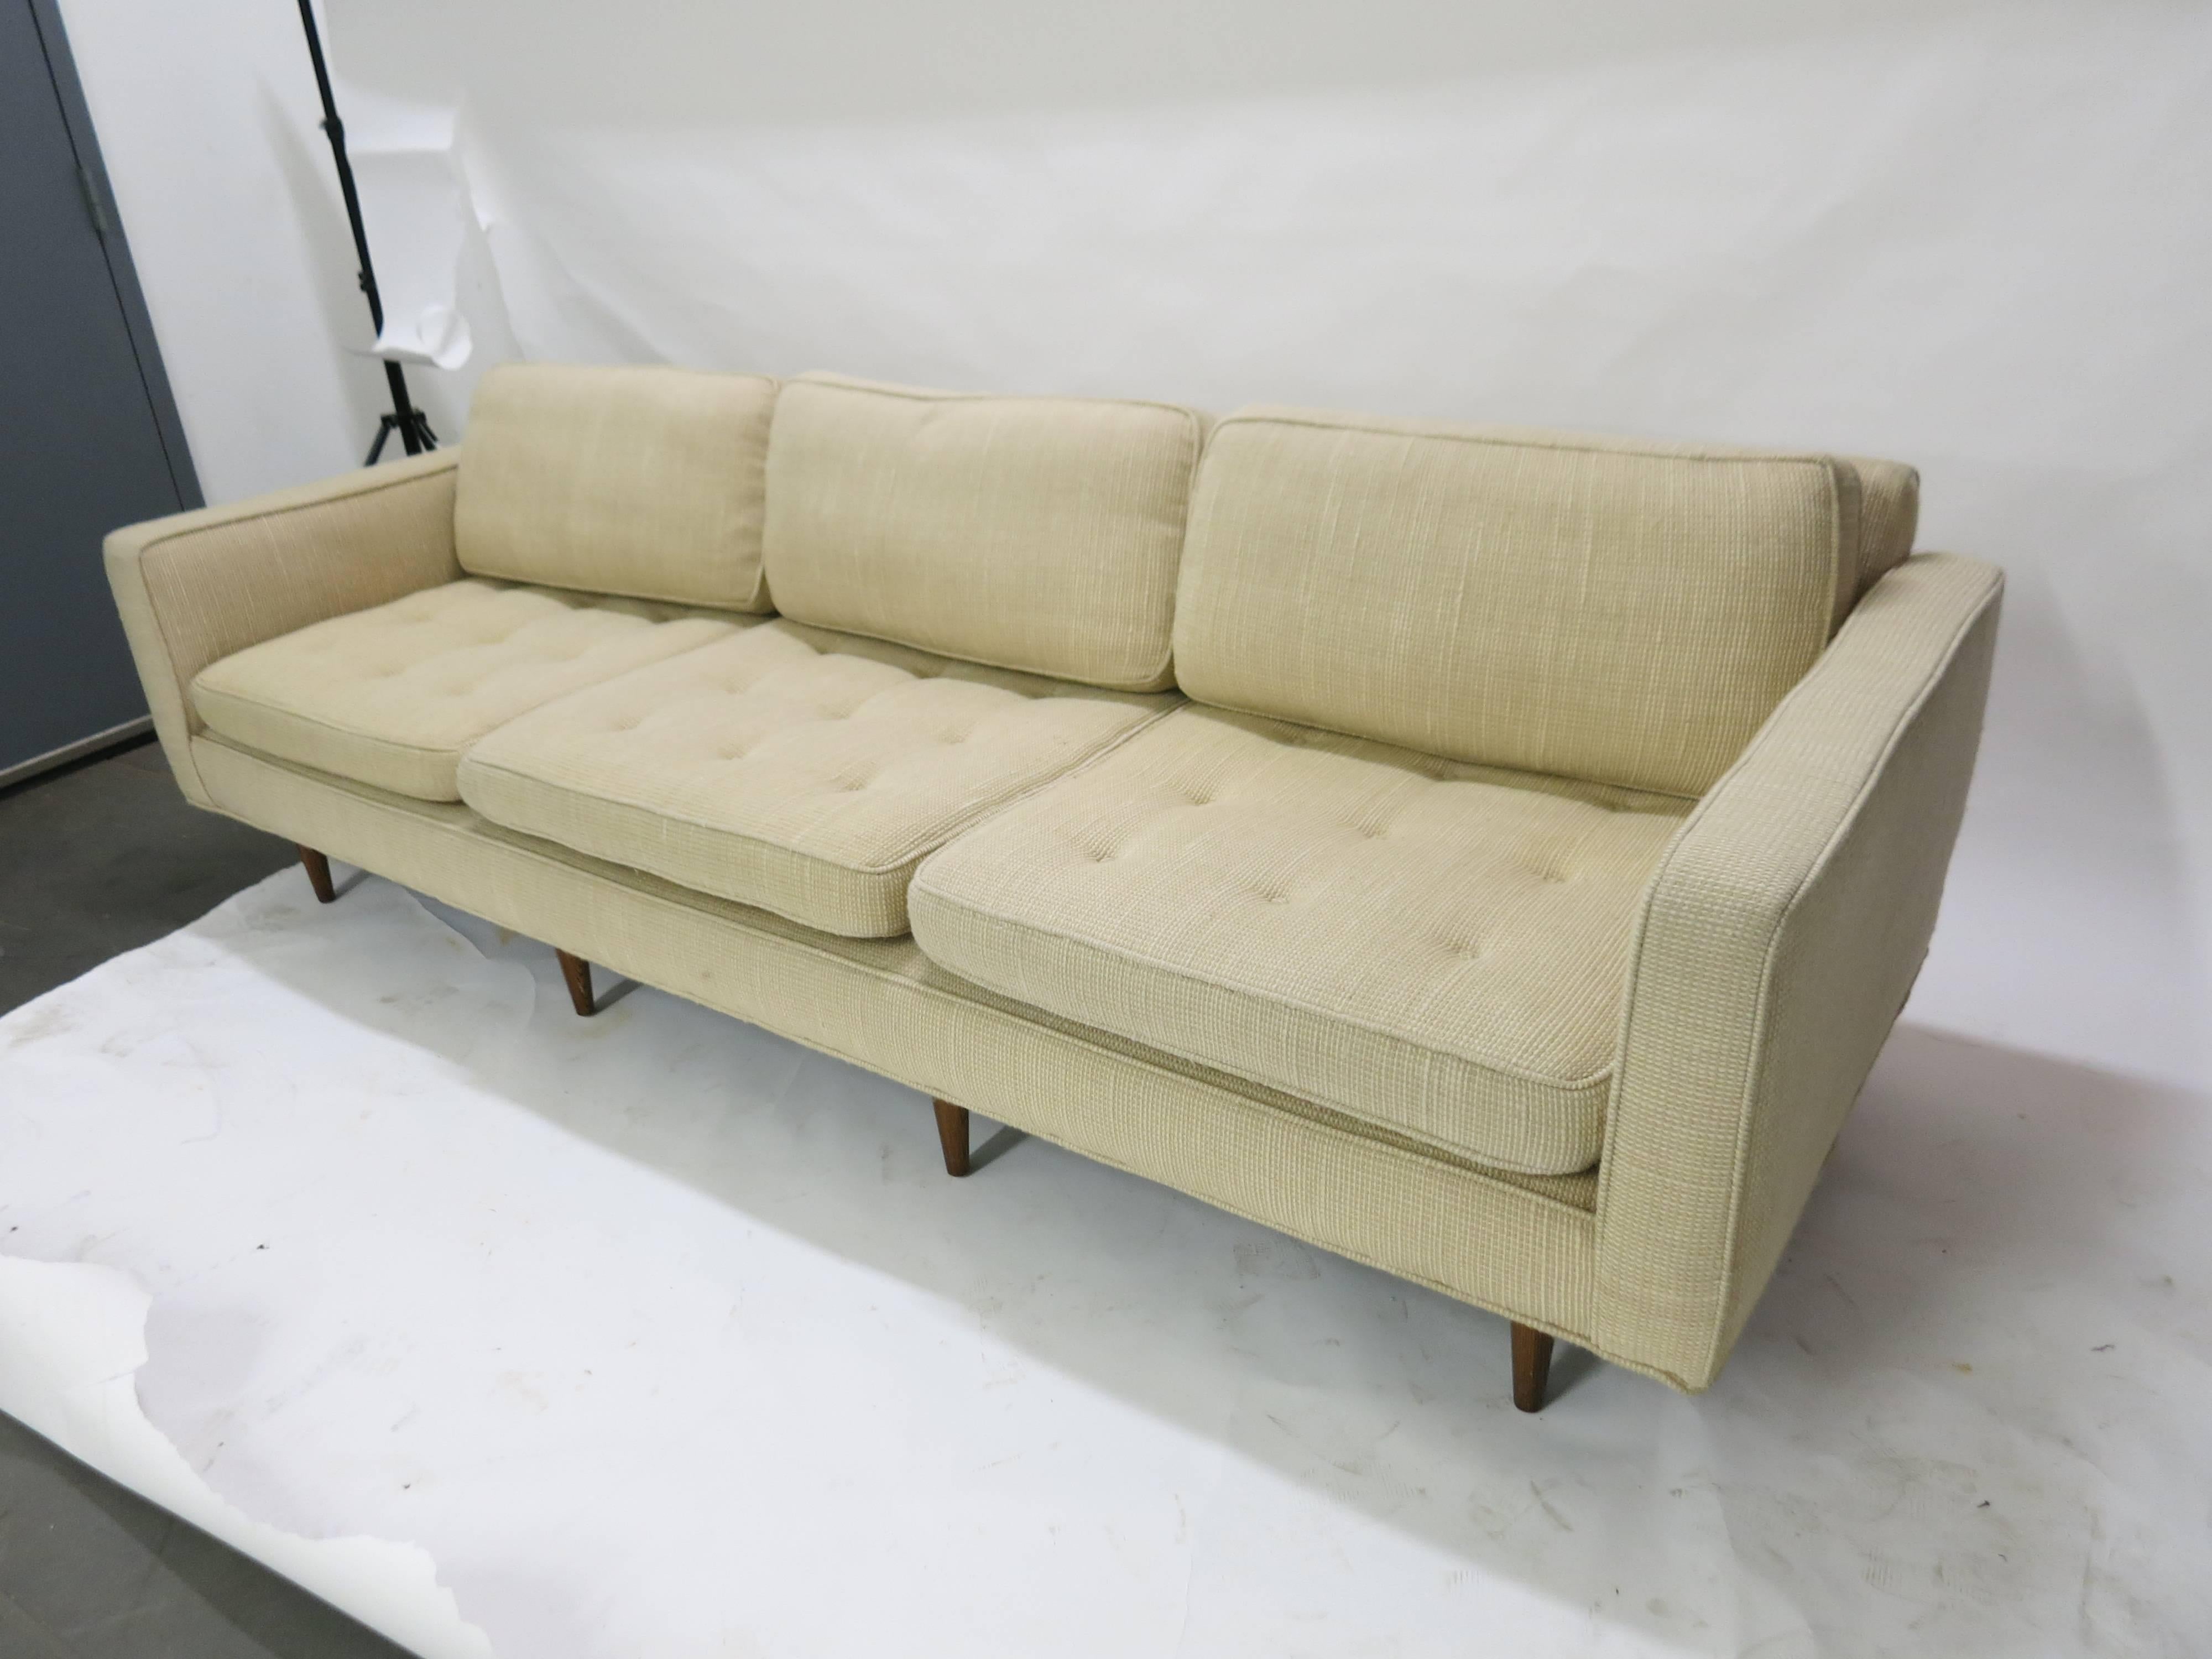 Sofa with three-seat cushions and three back pillow all in, original knoll fabric all supported by eight tapered wood legs. Sofa and fabric are both in great vintage condition and could be used as is. No rips no worn spots and no stains!!!
      